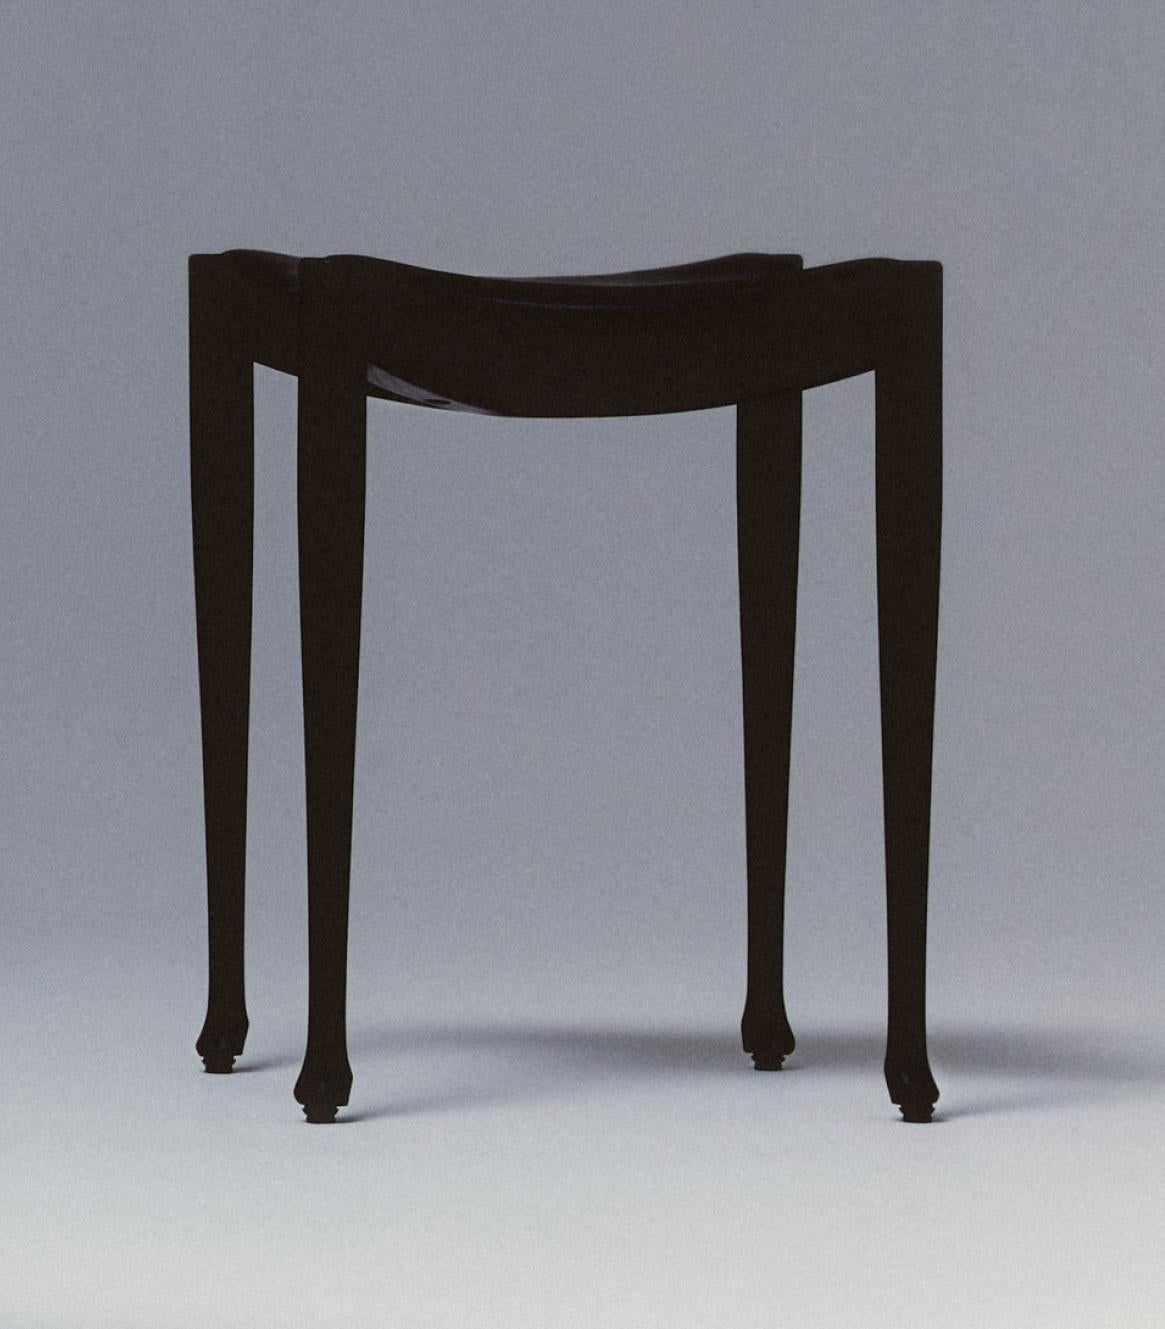 Gaulino Stool by Oscar Tusquets
Dimensions: Ø 50 x H 46 cm.
Materials: Solid stained black ash and black hide.

Frame in natural varnished solid ash, ash stained black or coral red. Seat upholstered in natural hide, black hide or toasted hide.